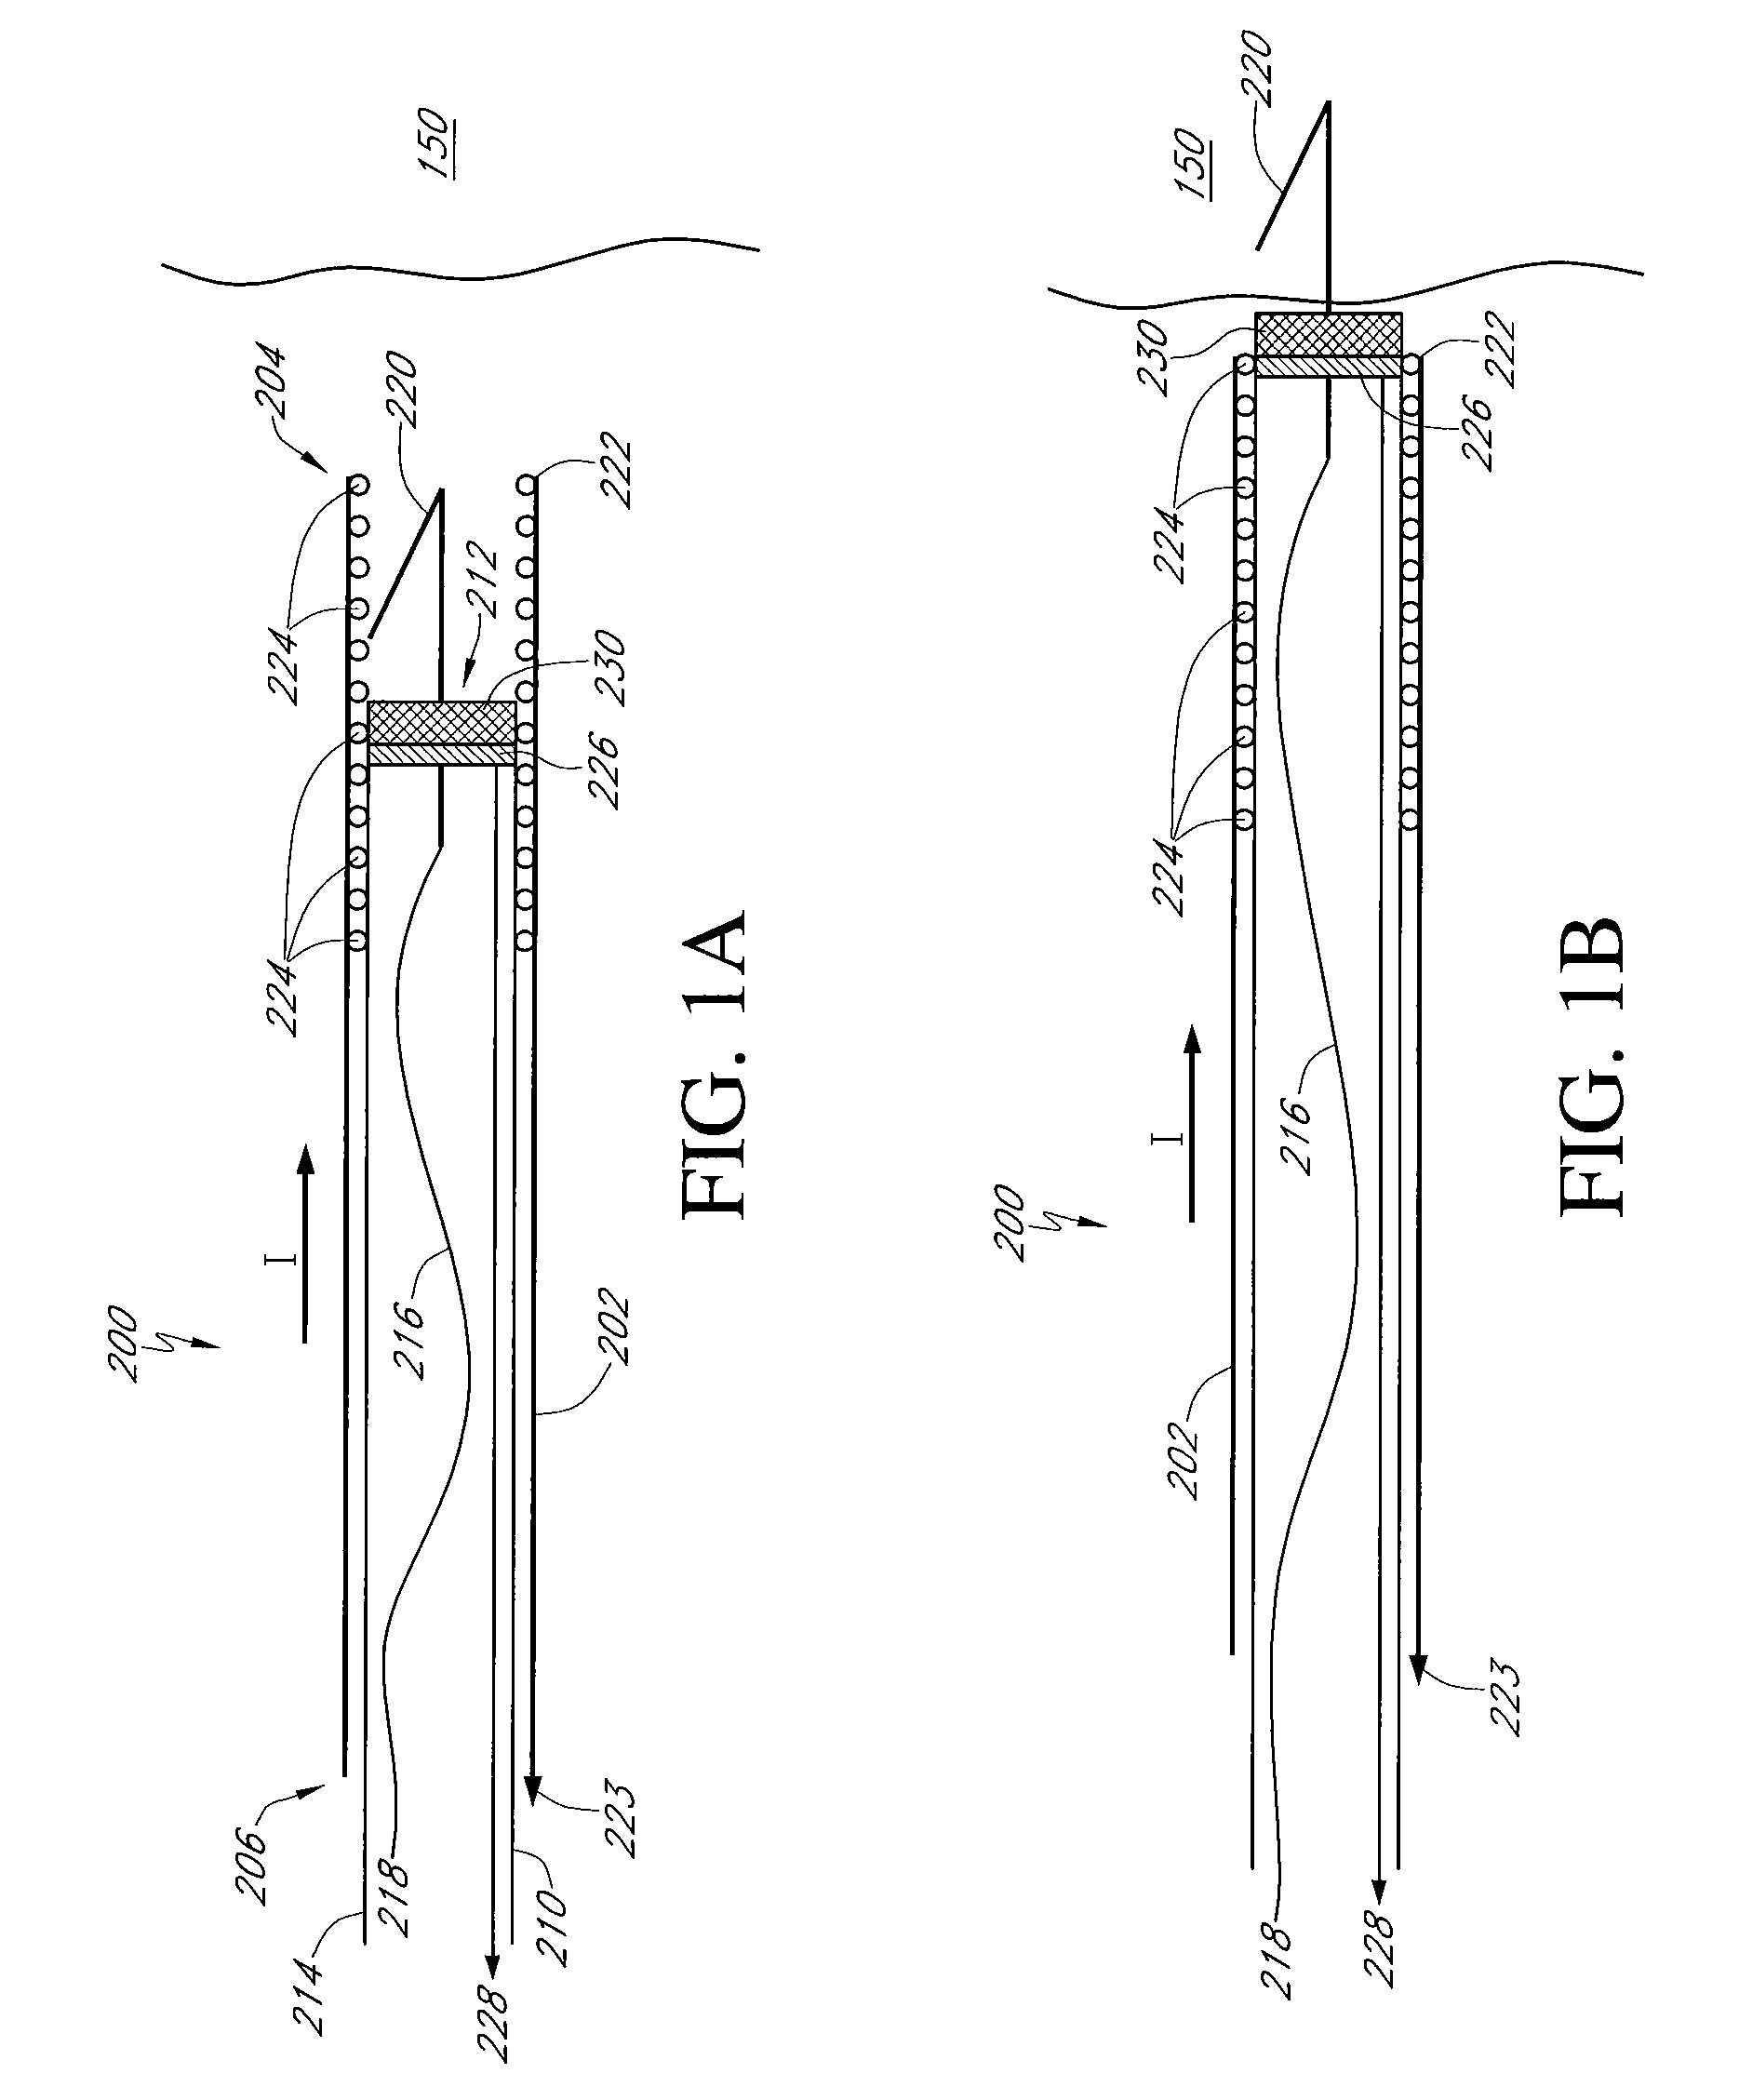 Implantable lead/electrode delivery measurement and feedback system